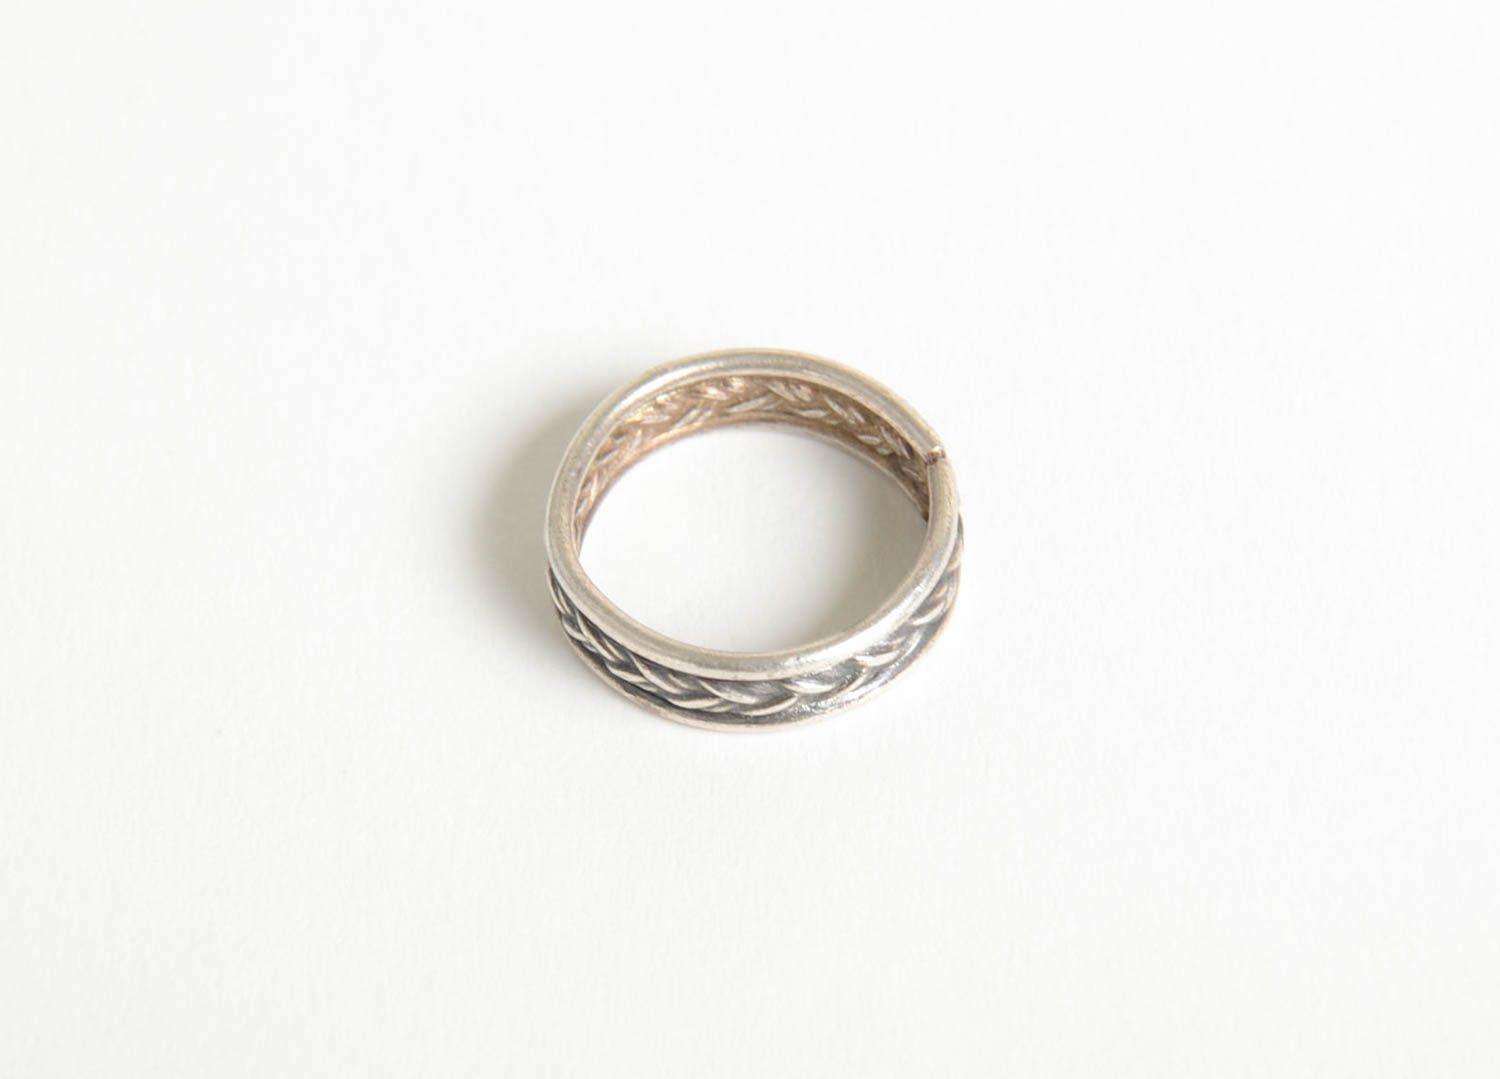 Unusual handmade metal ring seal ring design fashion trends gifts for her photo 5